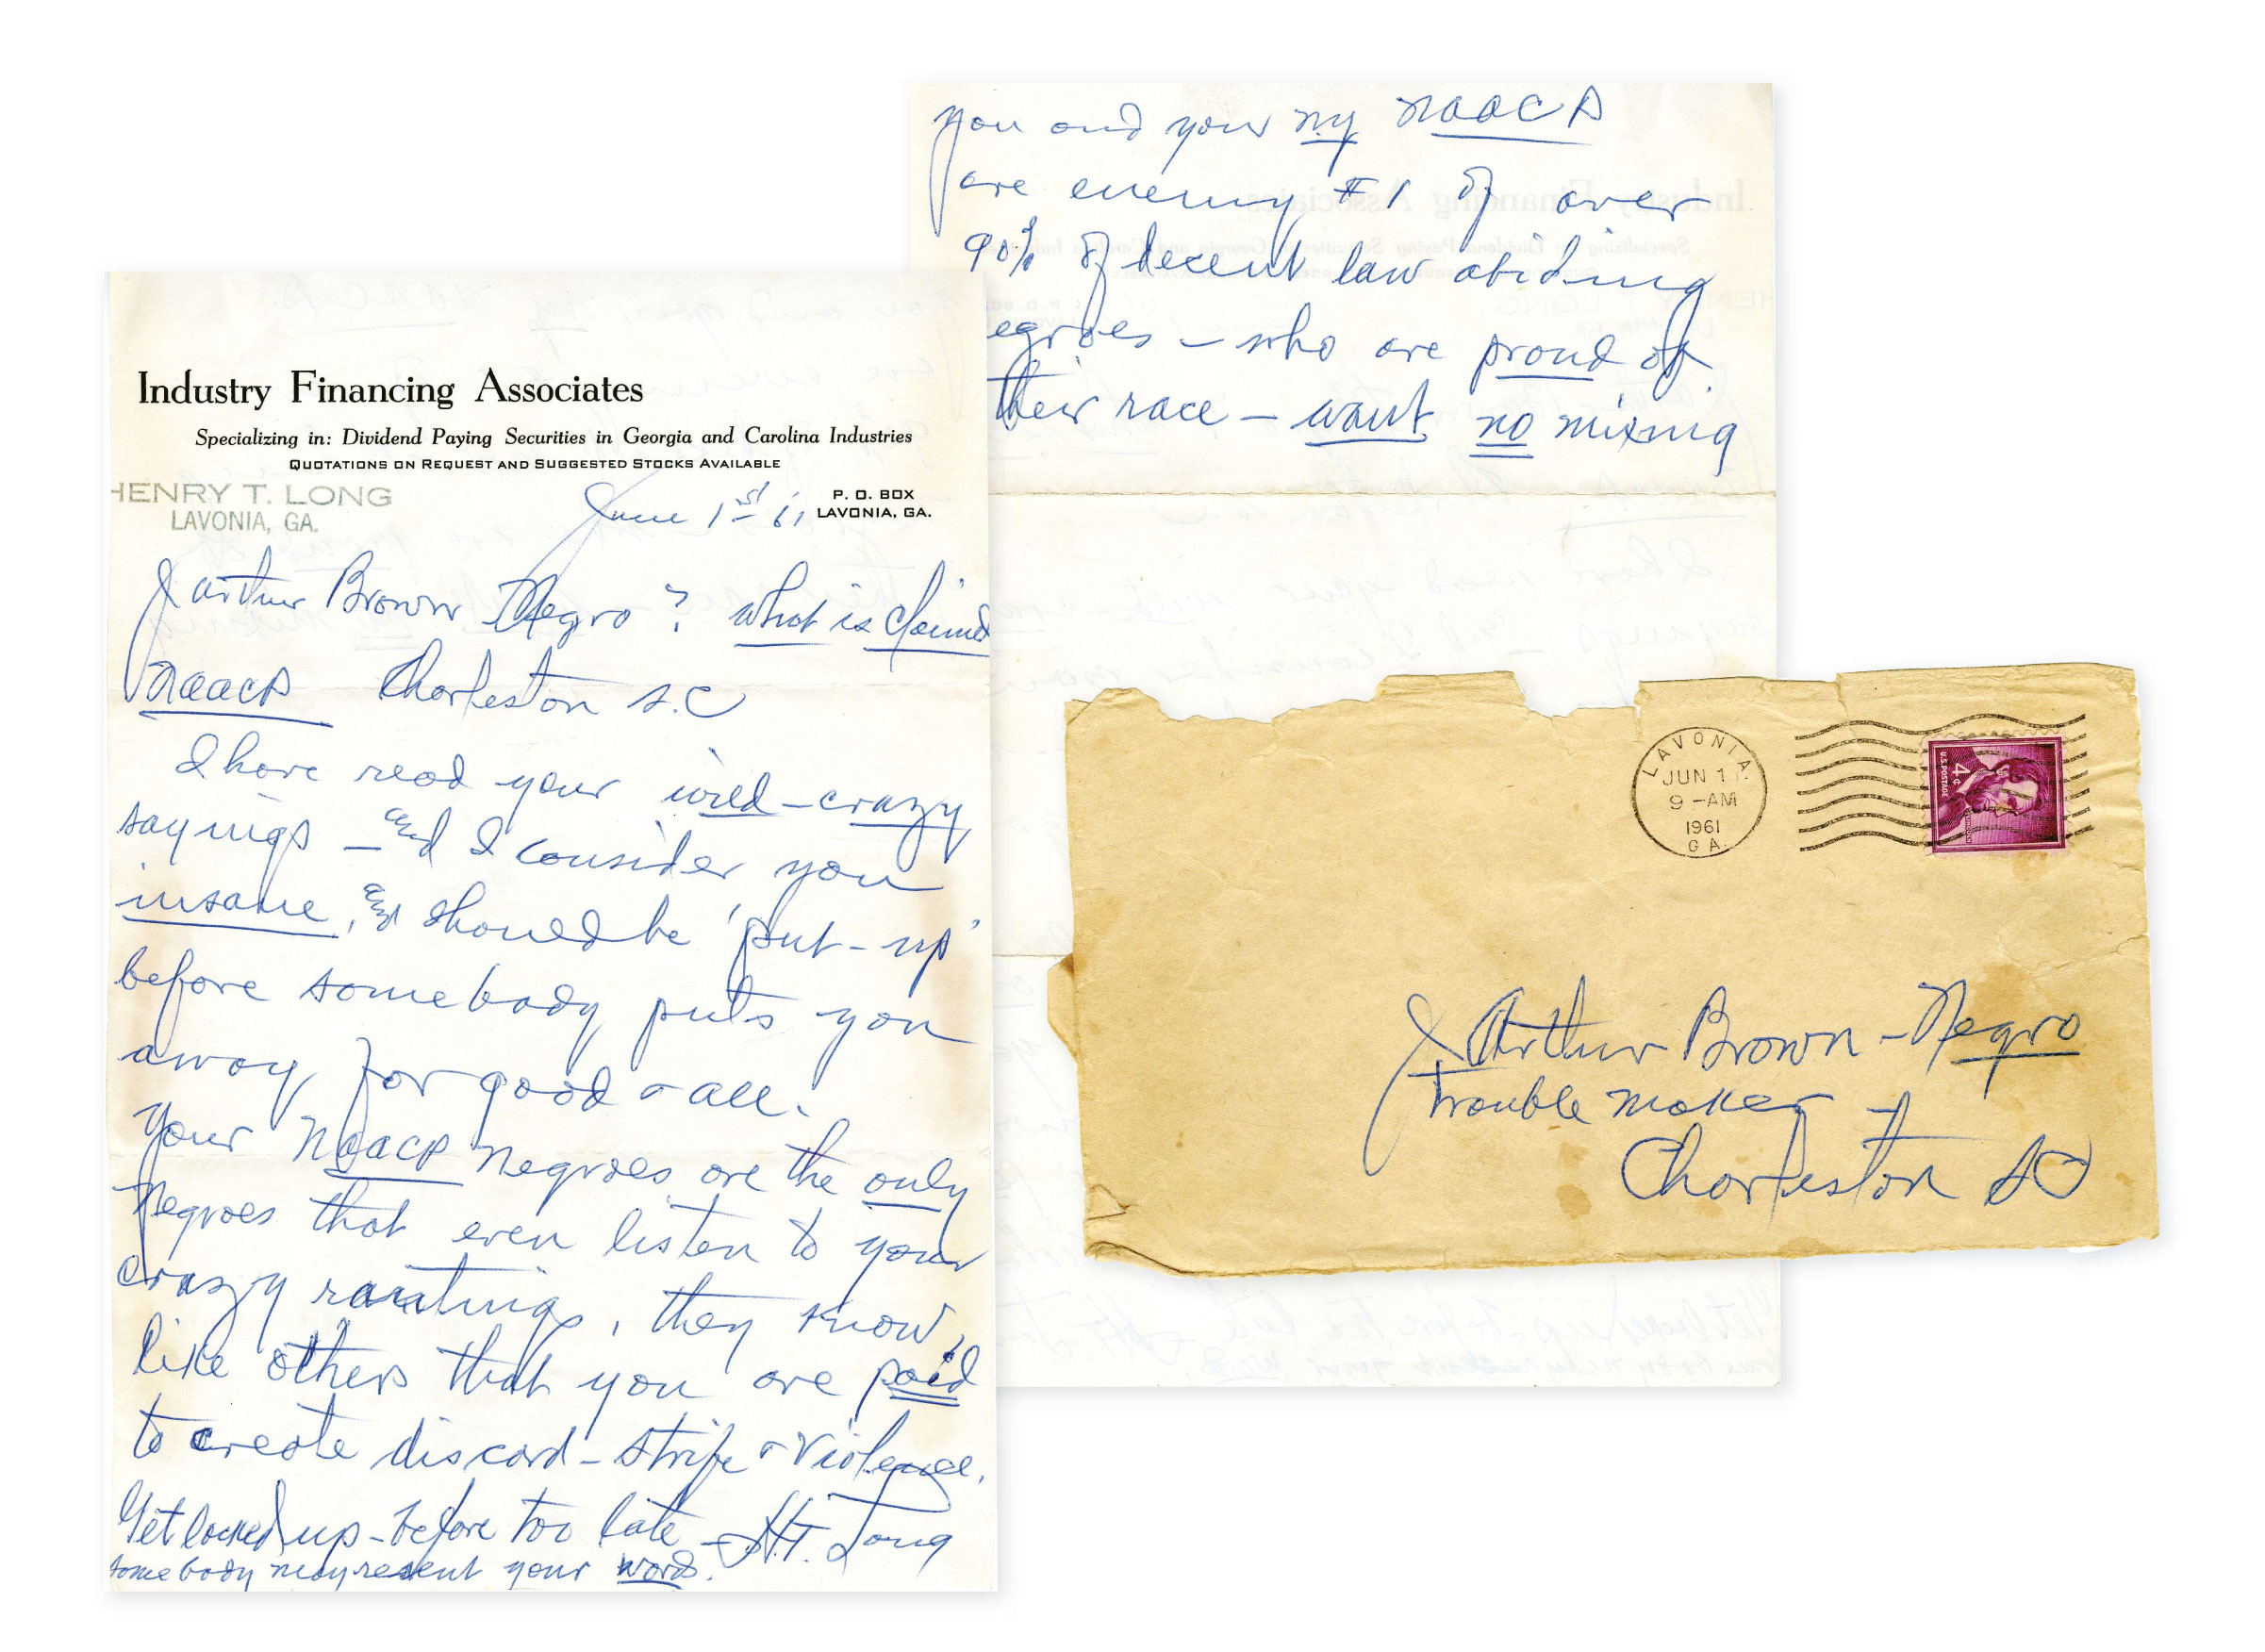 The J. Arthur Brown papers at the Avery Research Center reveal how the family was on the front line of local civil rights battles, and often on the receiving end of hateful tirades.